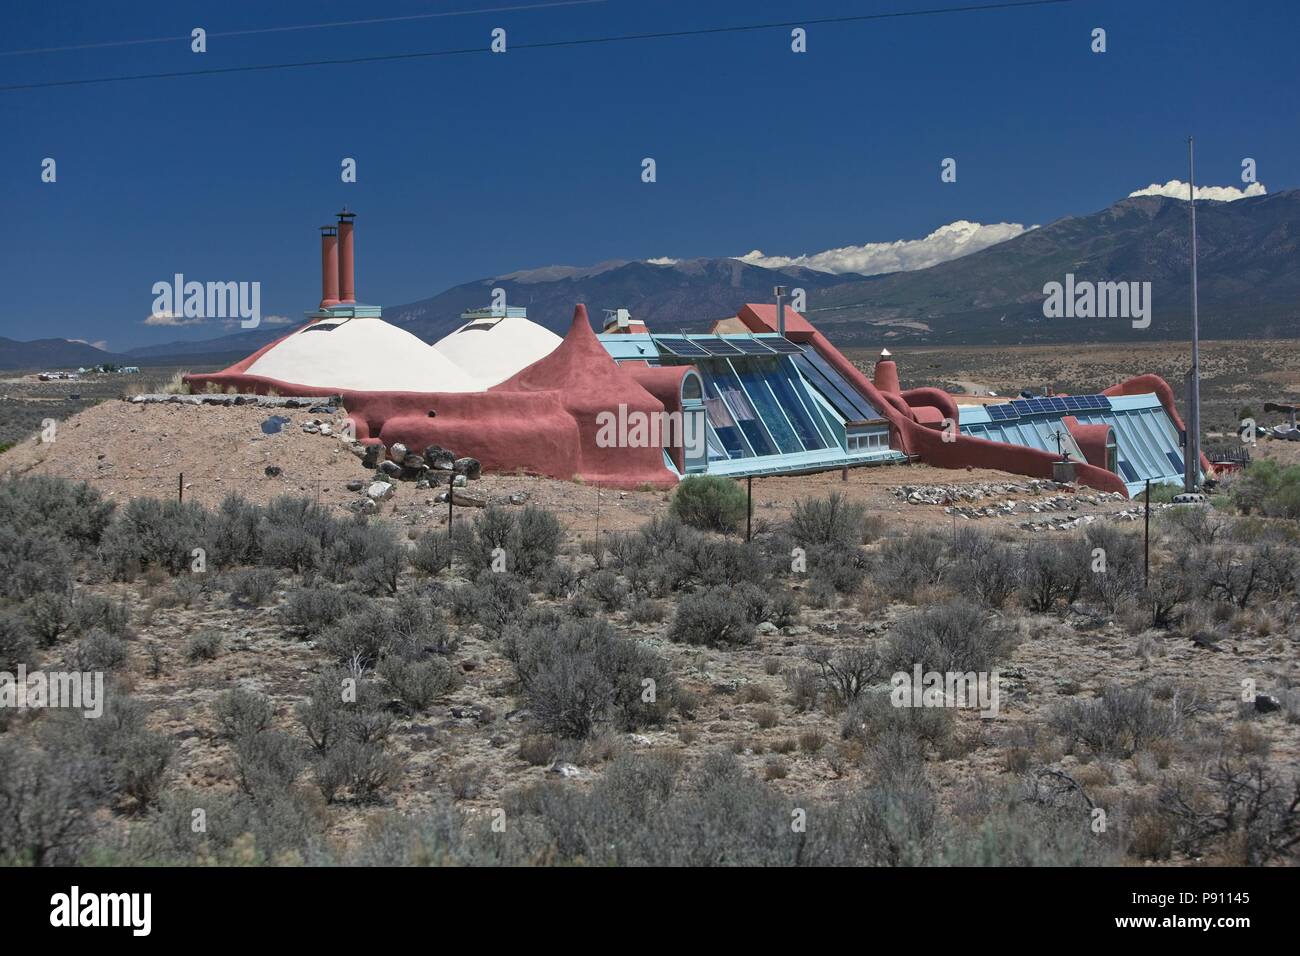 Innovative and sustaining earthship housing found on the outskirts of Taos New Mexico. The houses use recycled and sustainable materials and rely on p Stock Photo